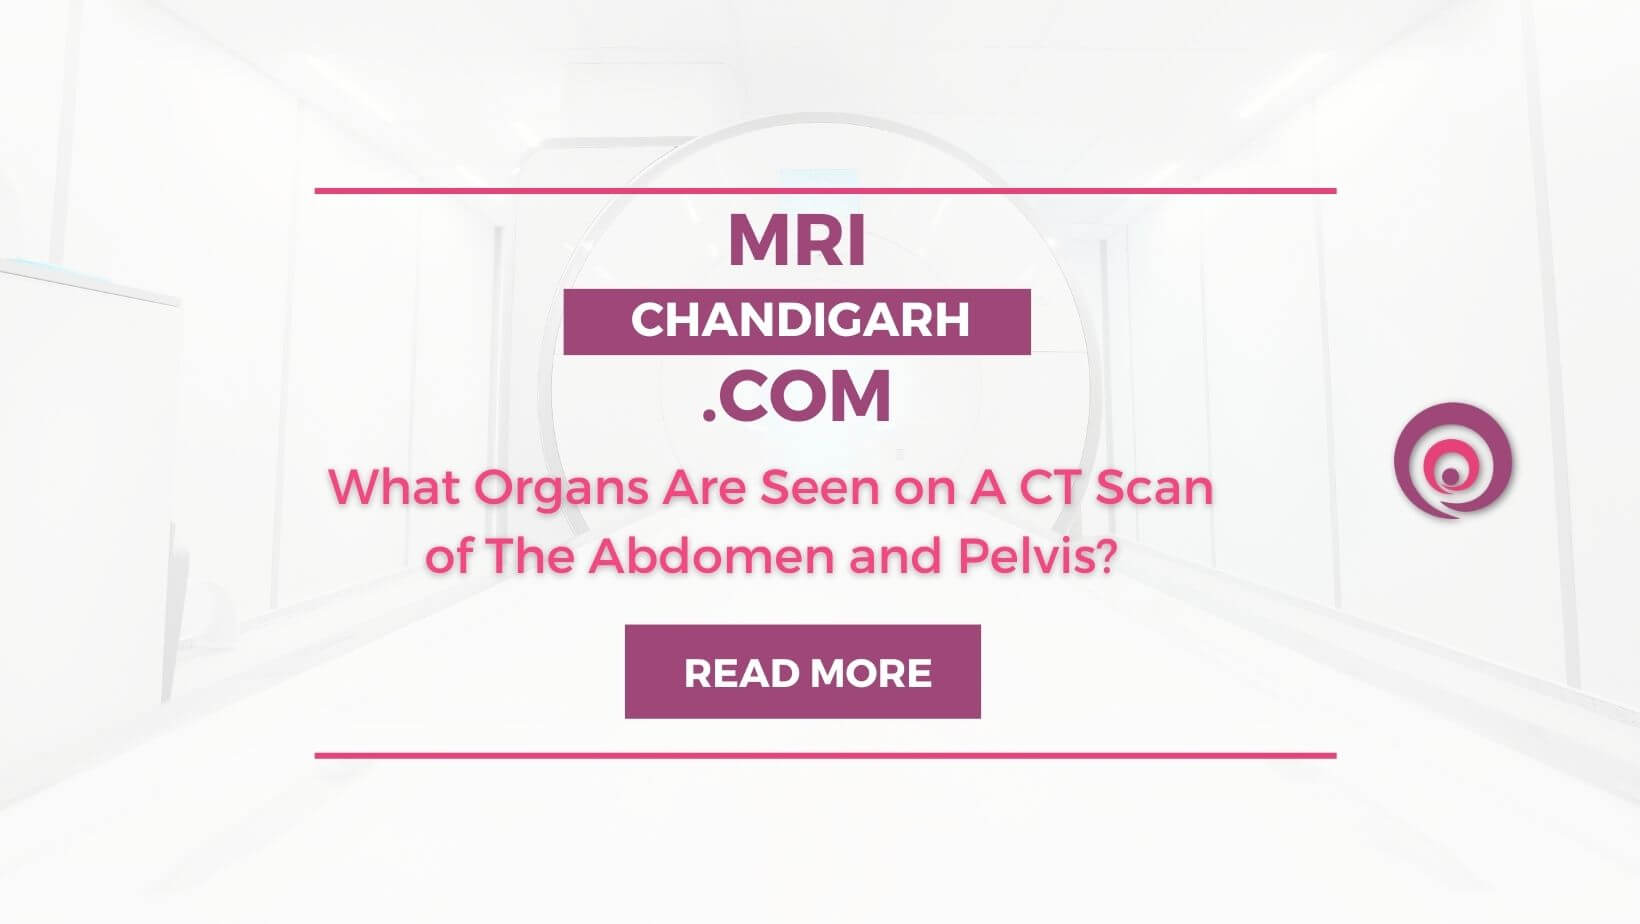 What Organs Are Seen on A CT Scan of The Abdomen and Pelvis?